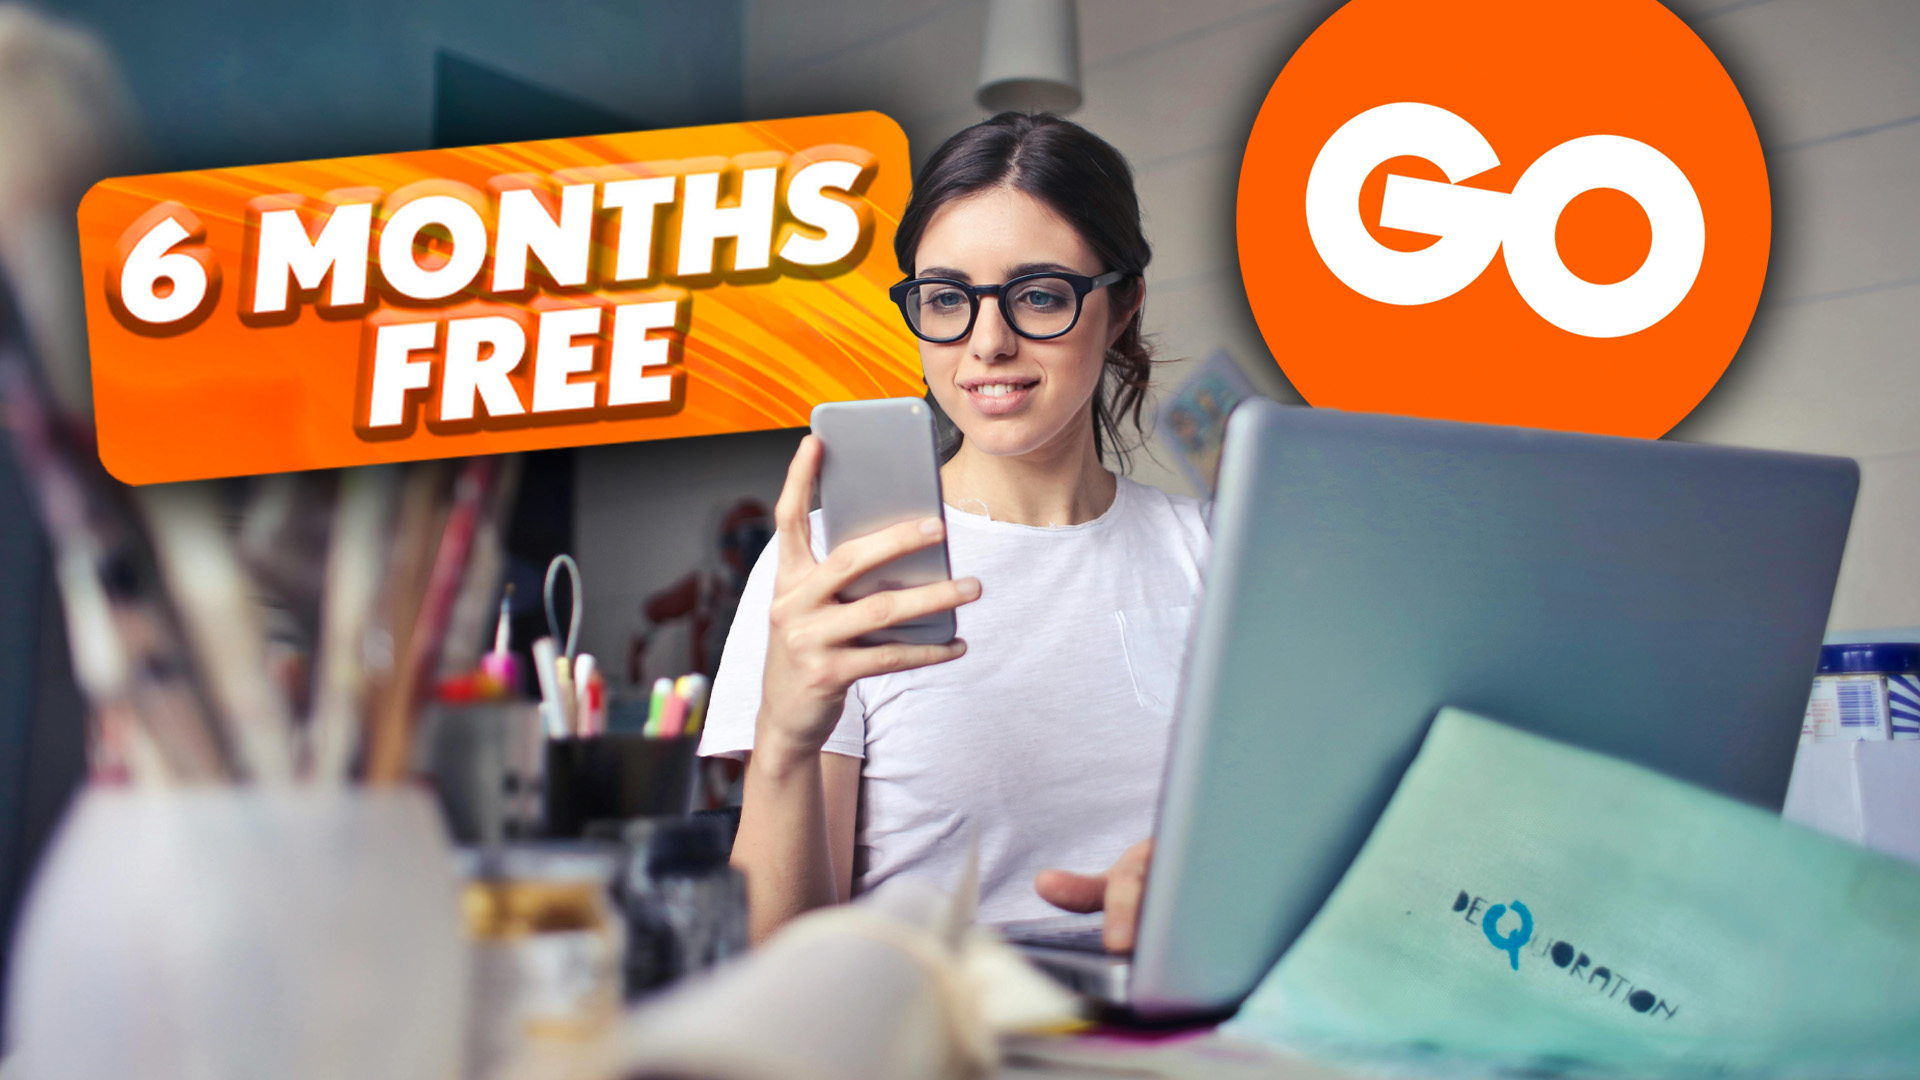 Level Up Your Internet with GO: Free Giga Speed for 6 Months!